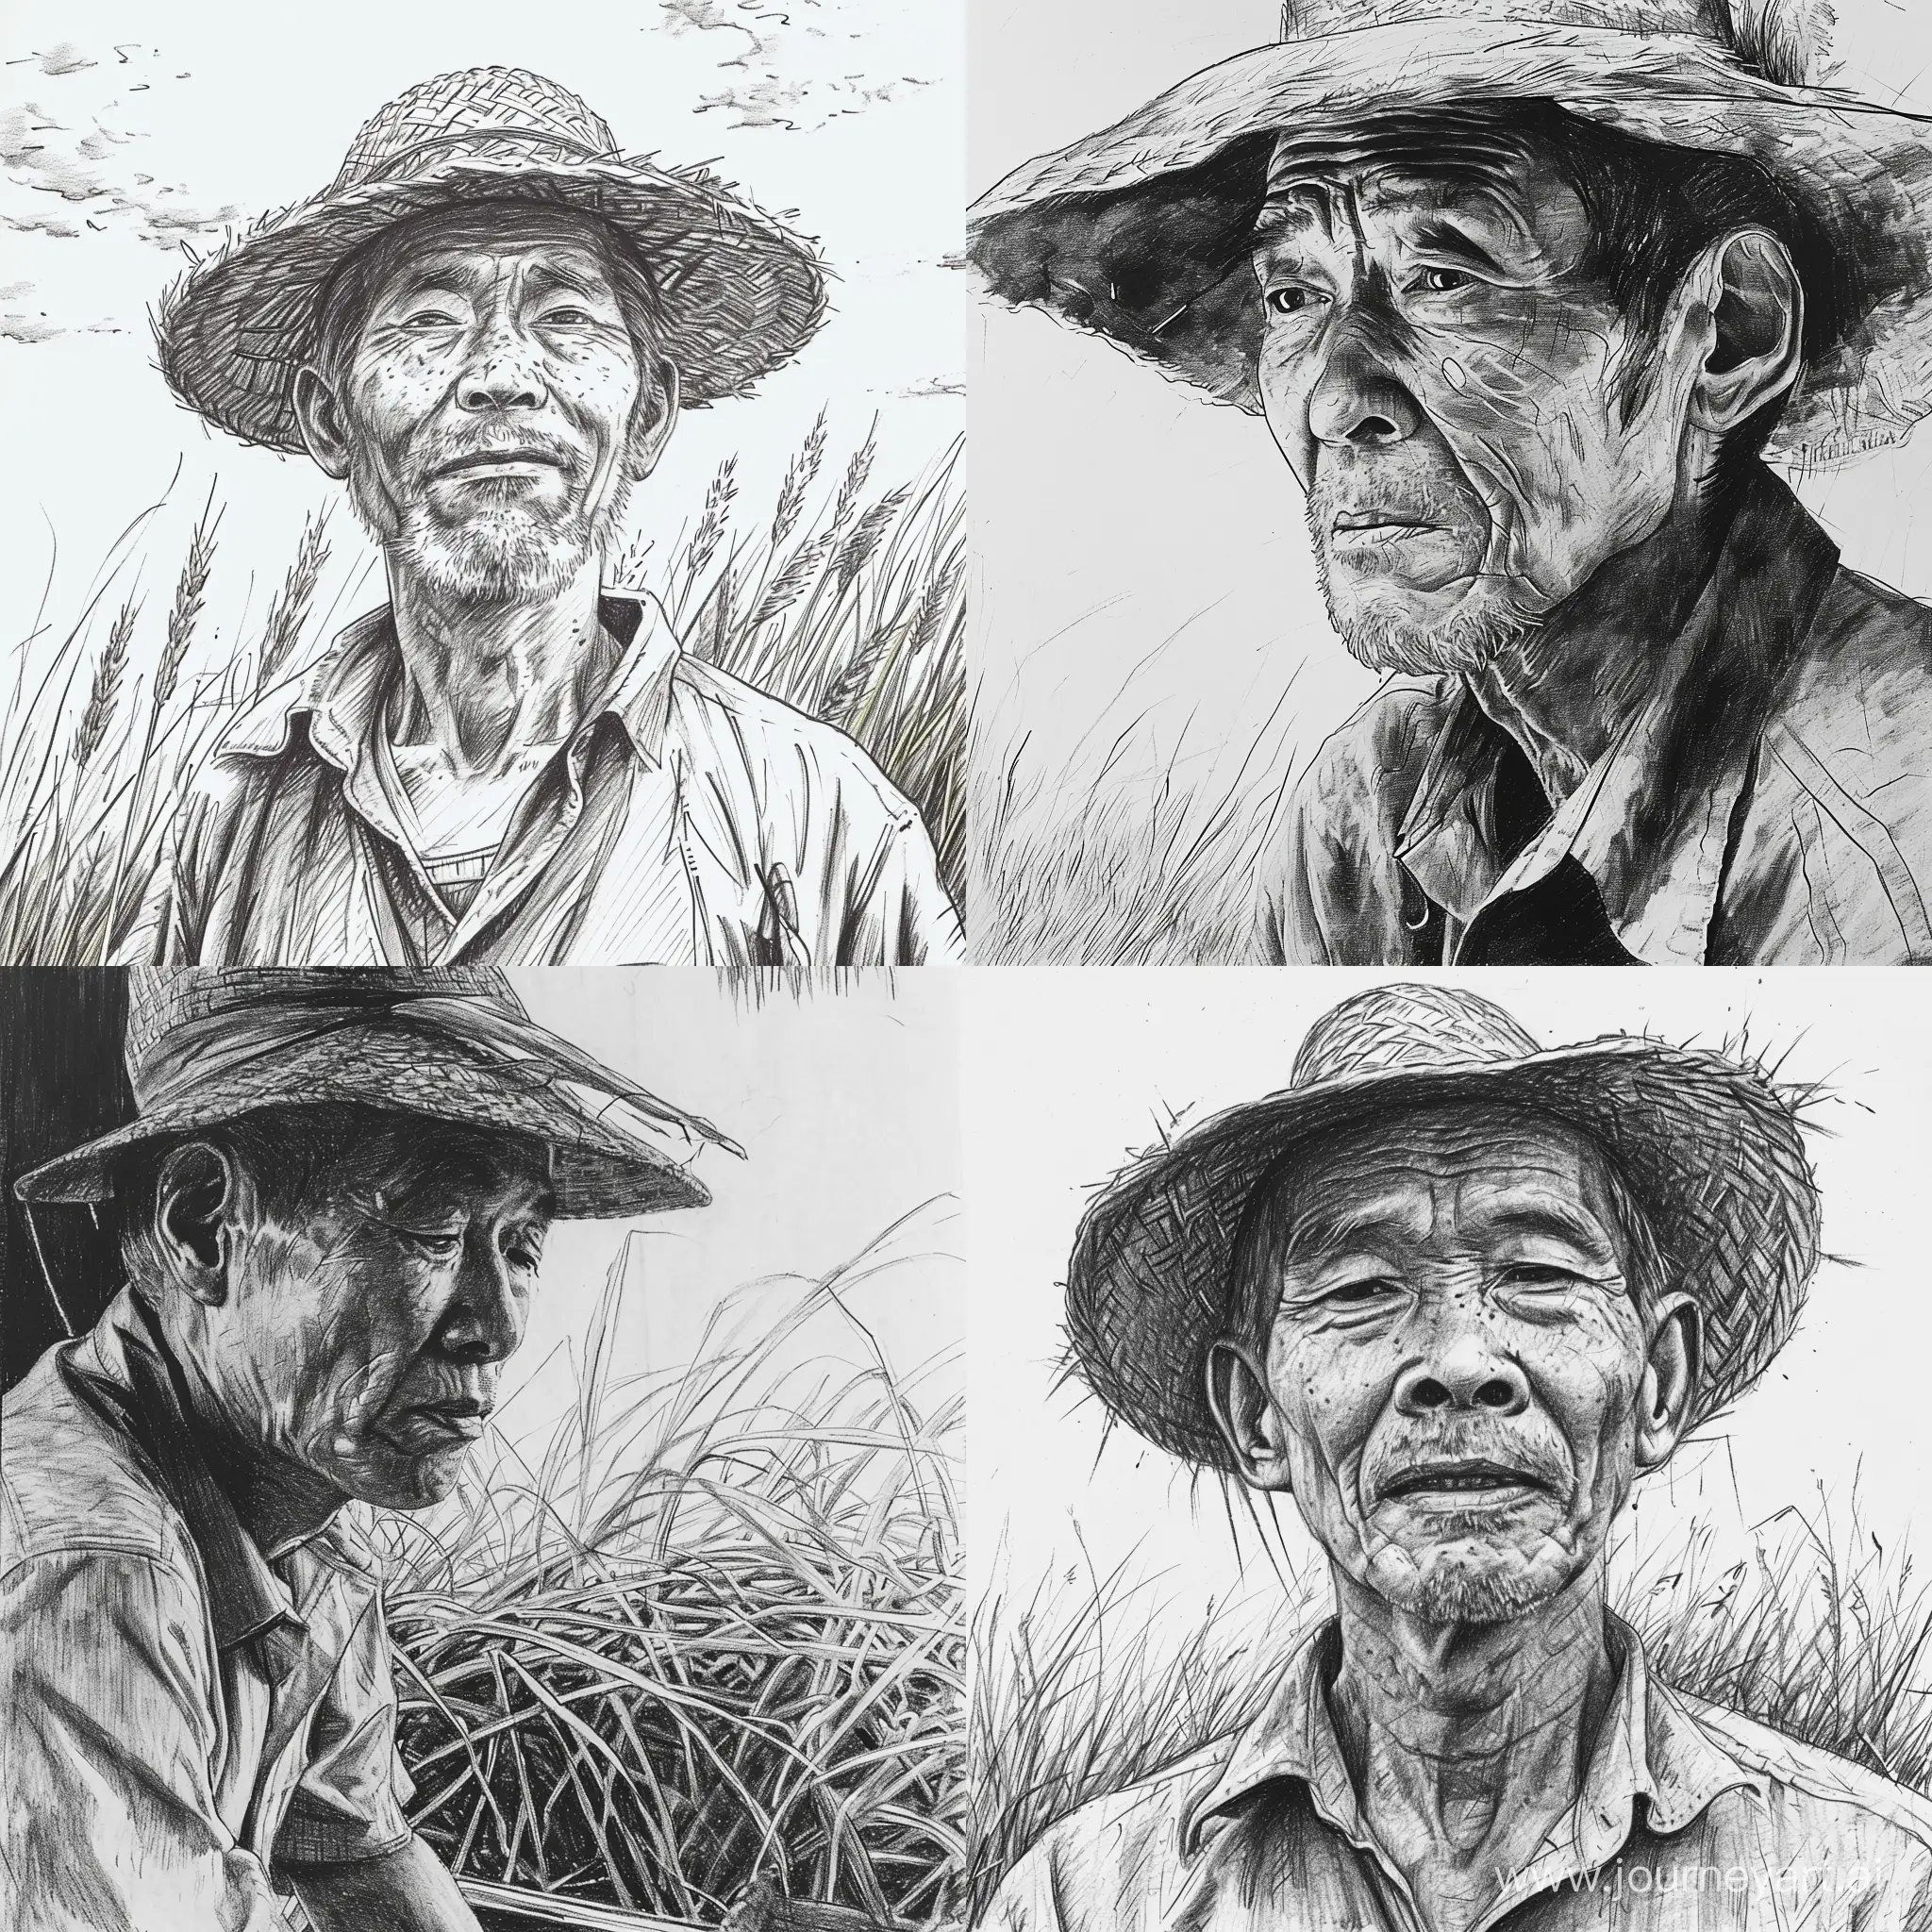 Rural-Man-in-Old-Anime-Style-Vintage-Pencil-Drawing-in-Black-and-White